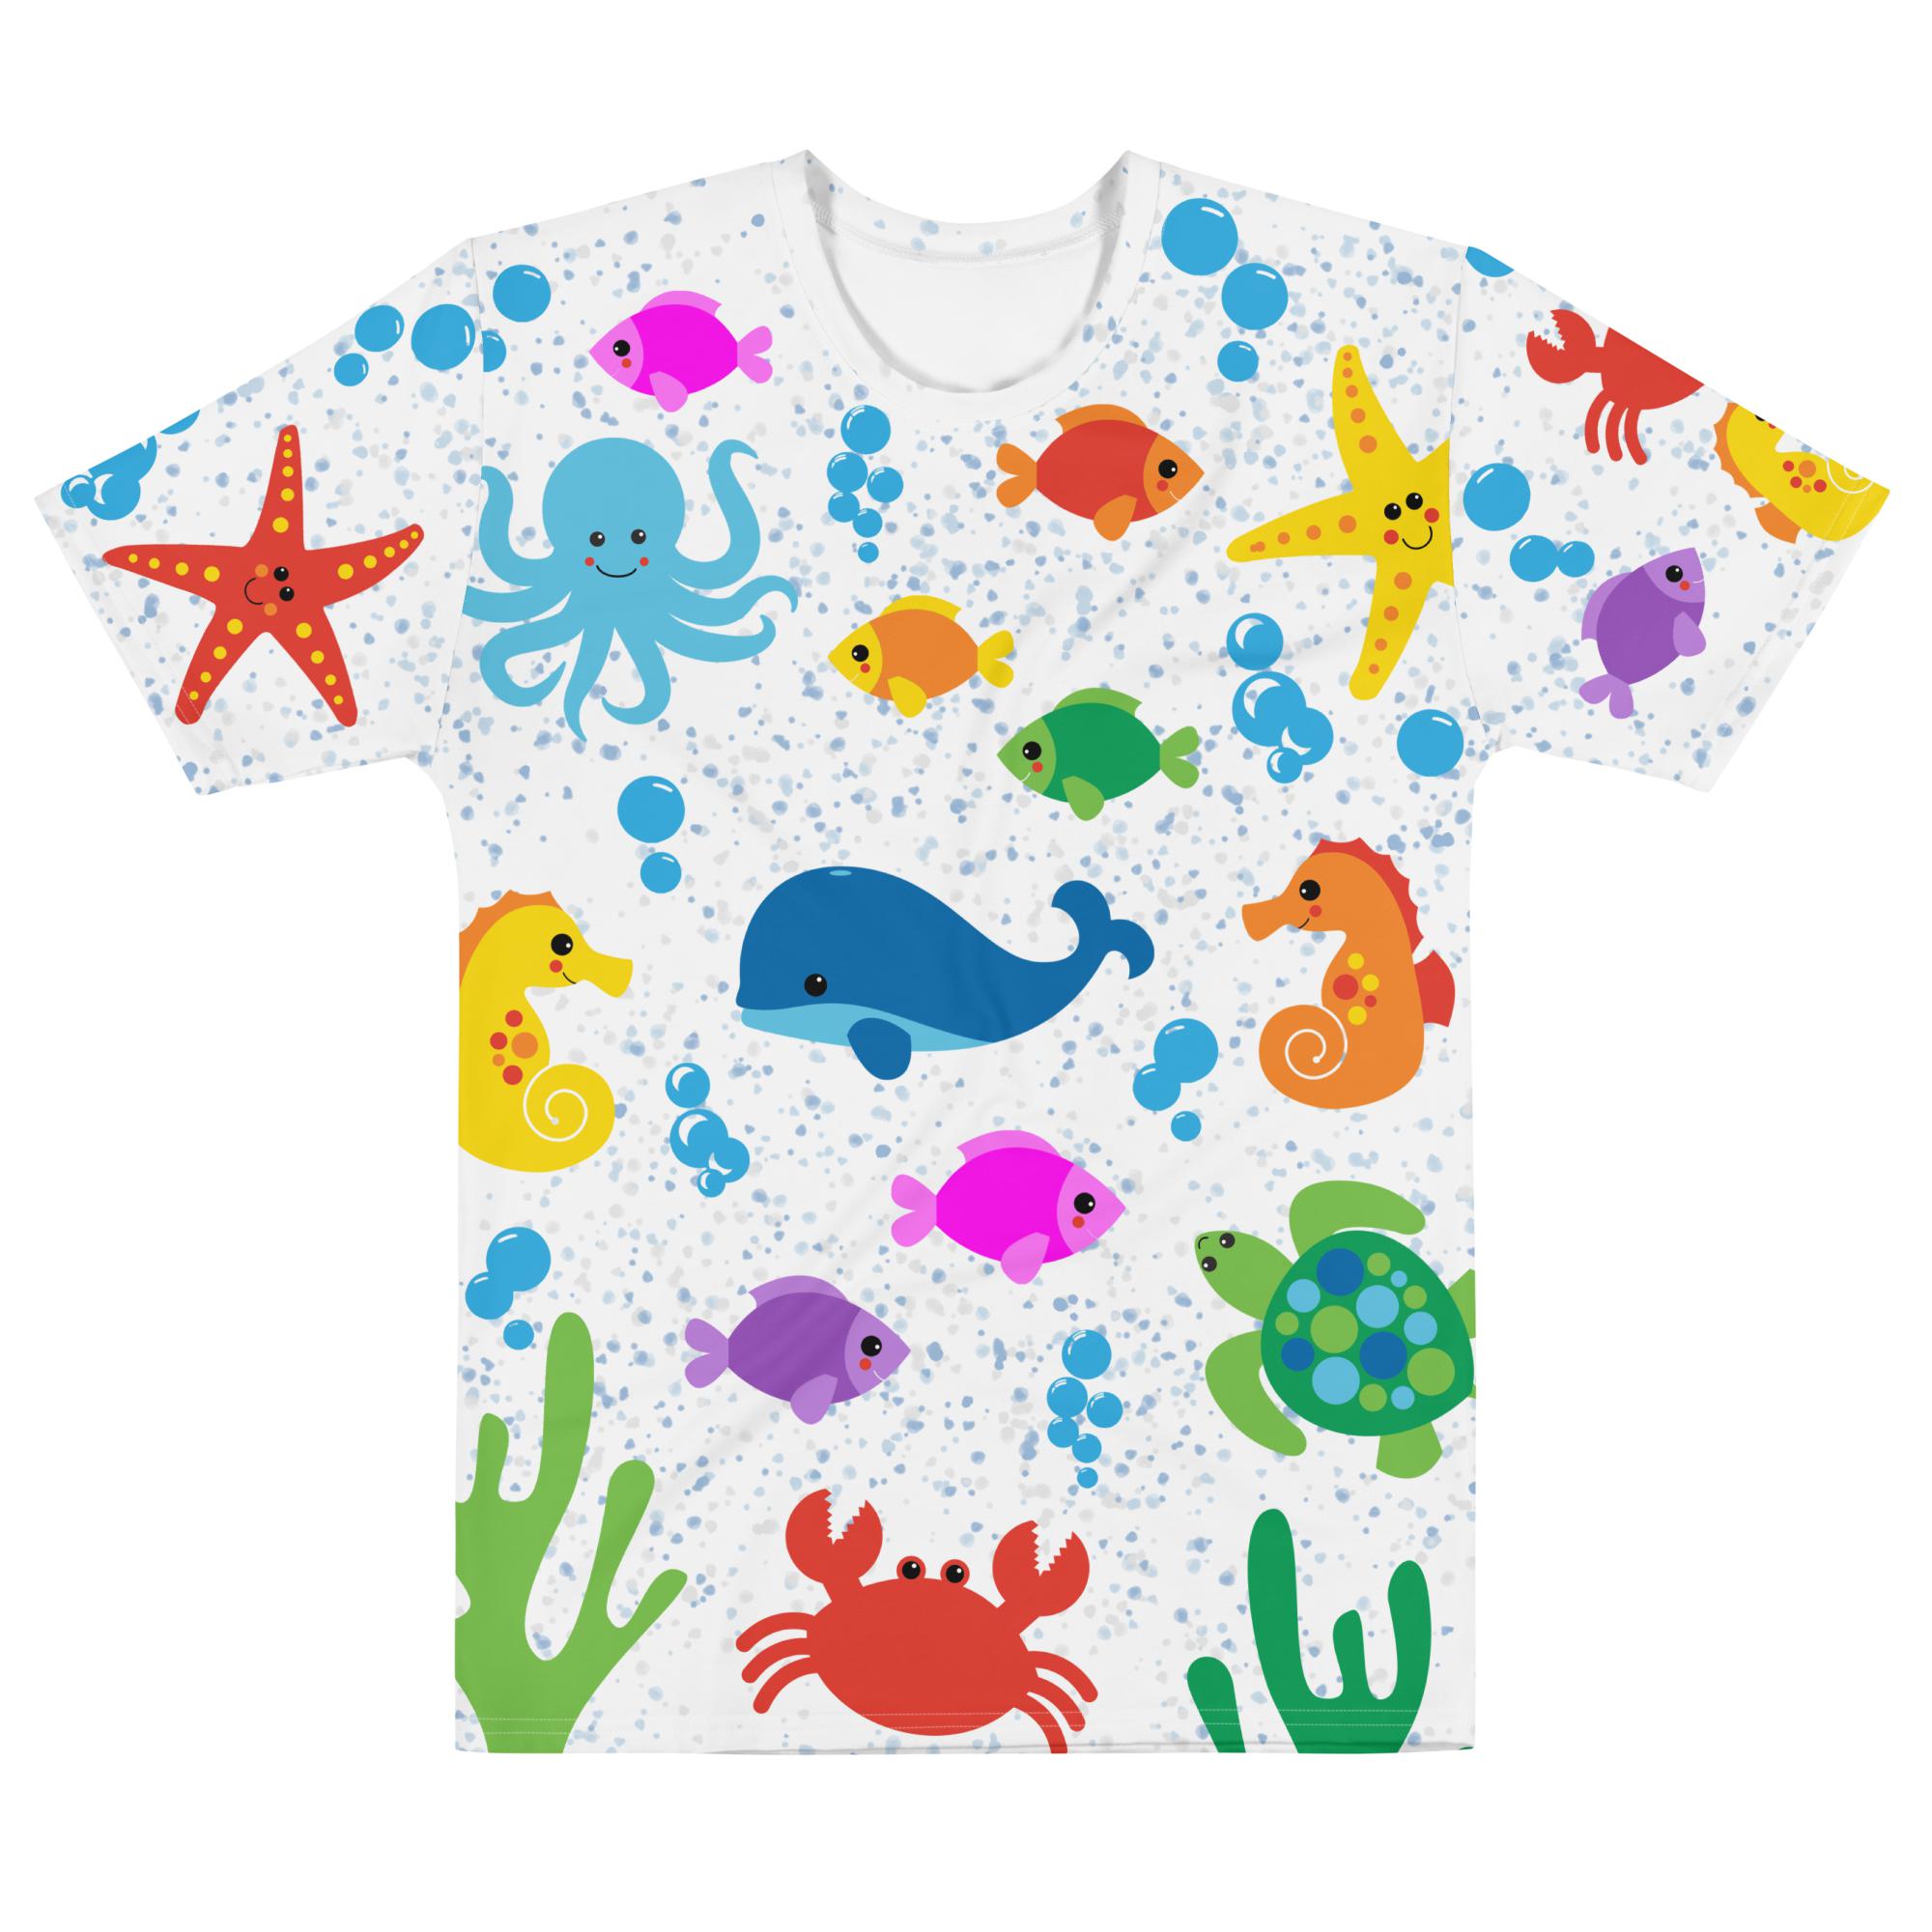 The Fishy Tee (Men's Short Sleeve)-Remy